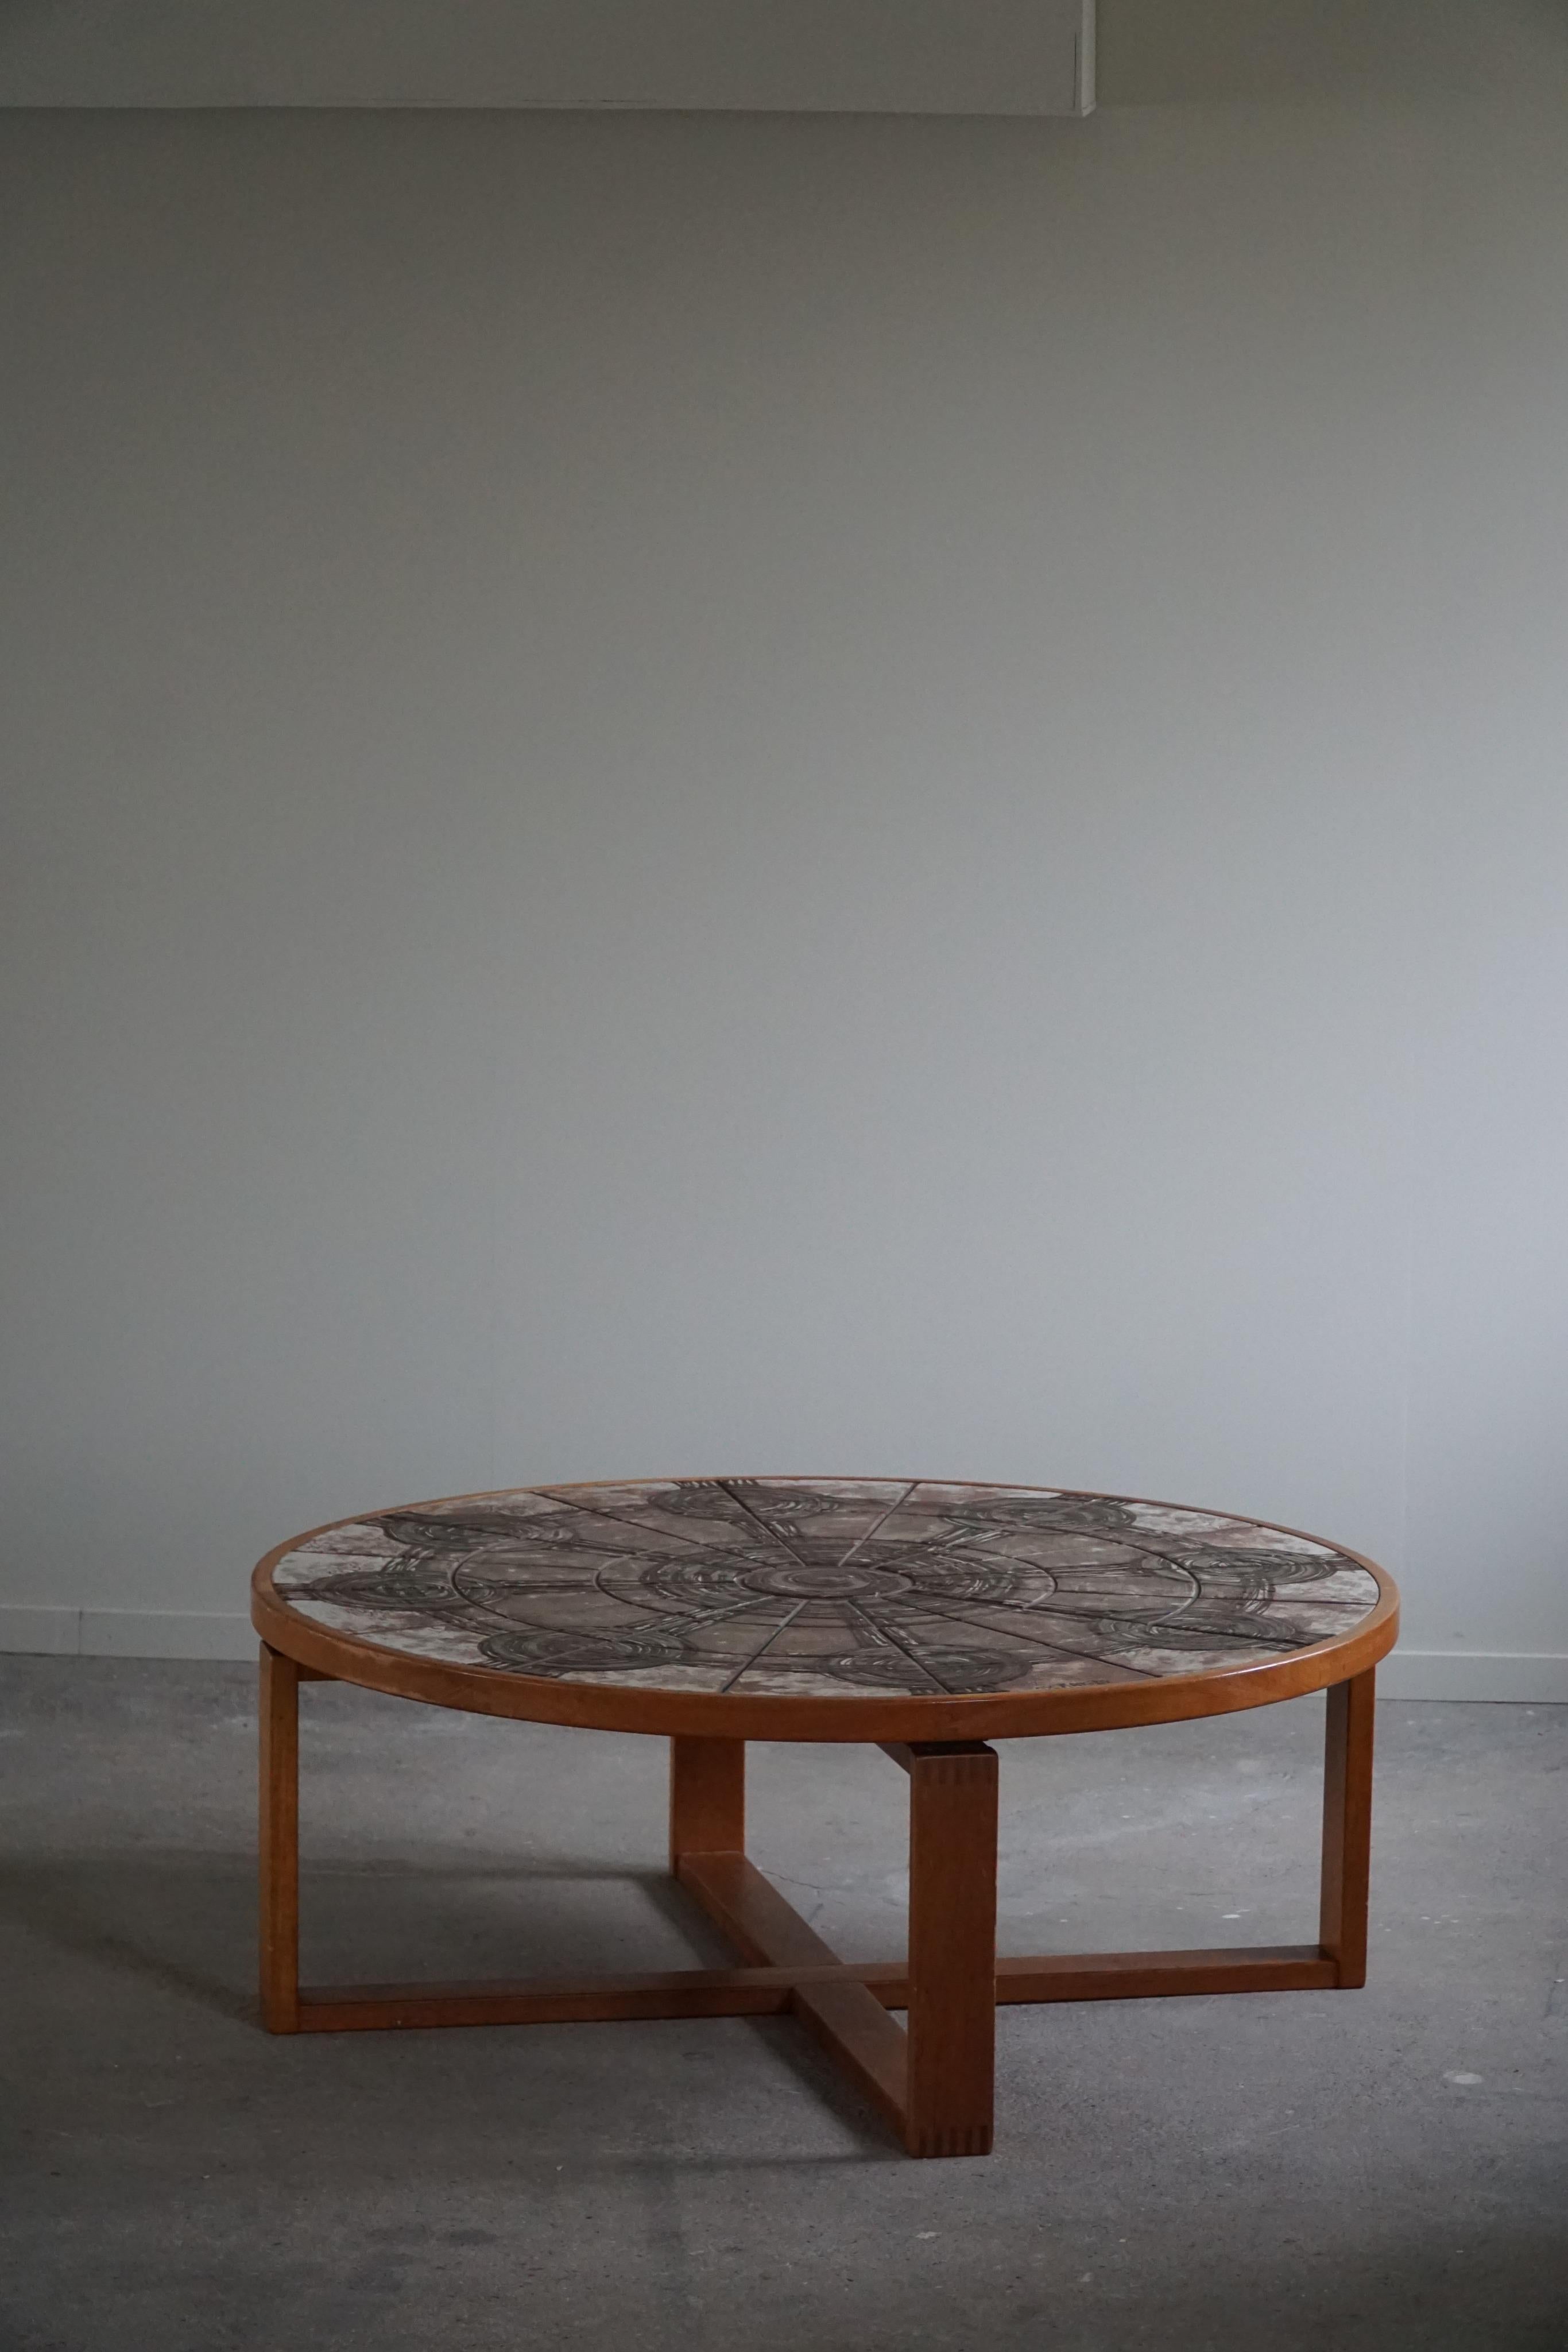 A quality large round coffee table / sofa table in solid teak with handmade ceramic tiles. Designed by Ox Art for Trioh in the 1970s, Denmark. Signed here by.

This lovely table will complement many interior styles. A modern, antique, classic,